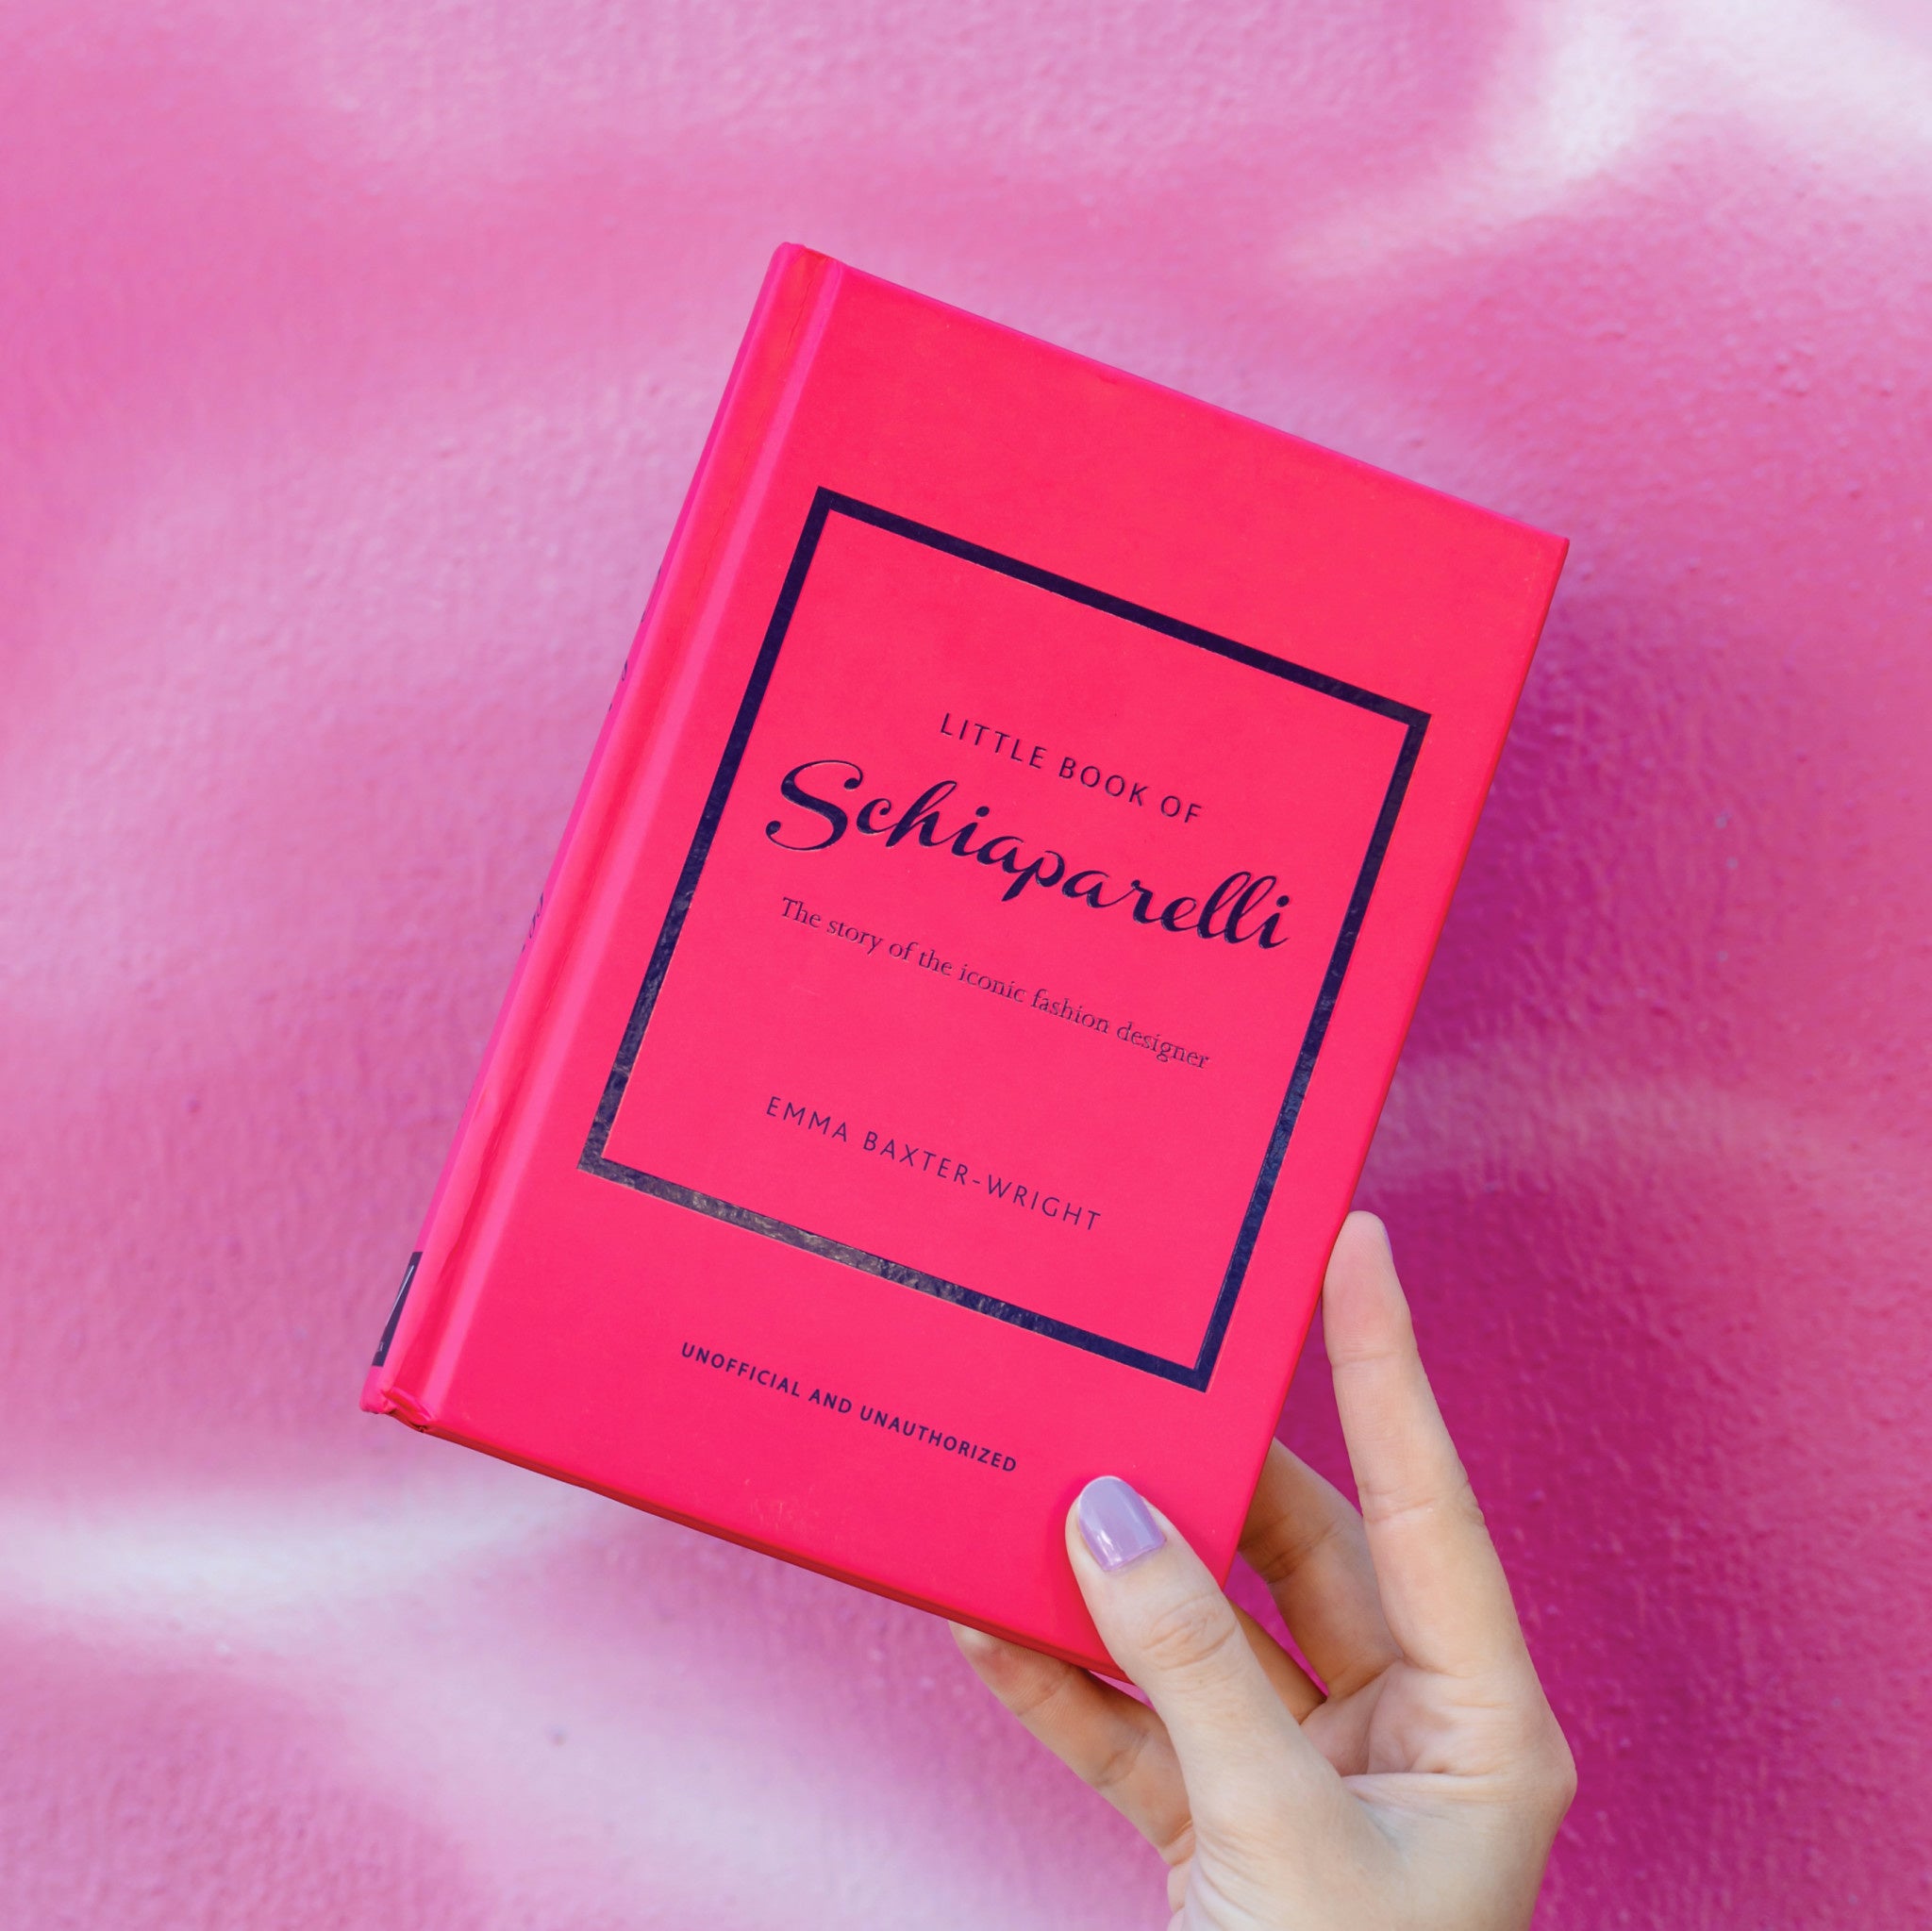 Little Book of Schiaparelli: The Story of the Iconic Fashion House - Wynwood Walls Shop